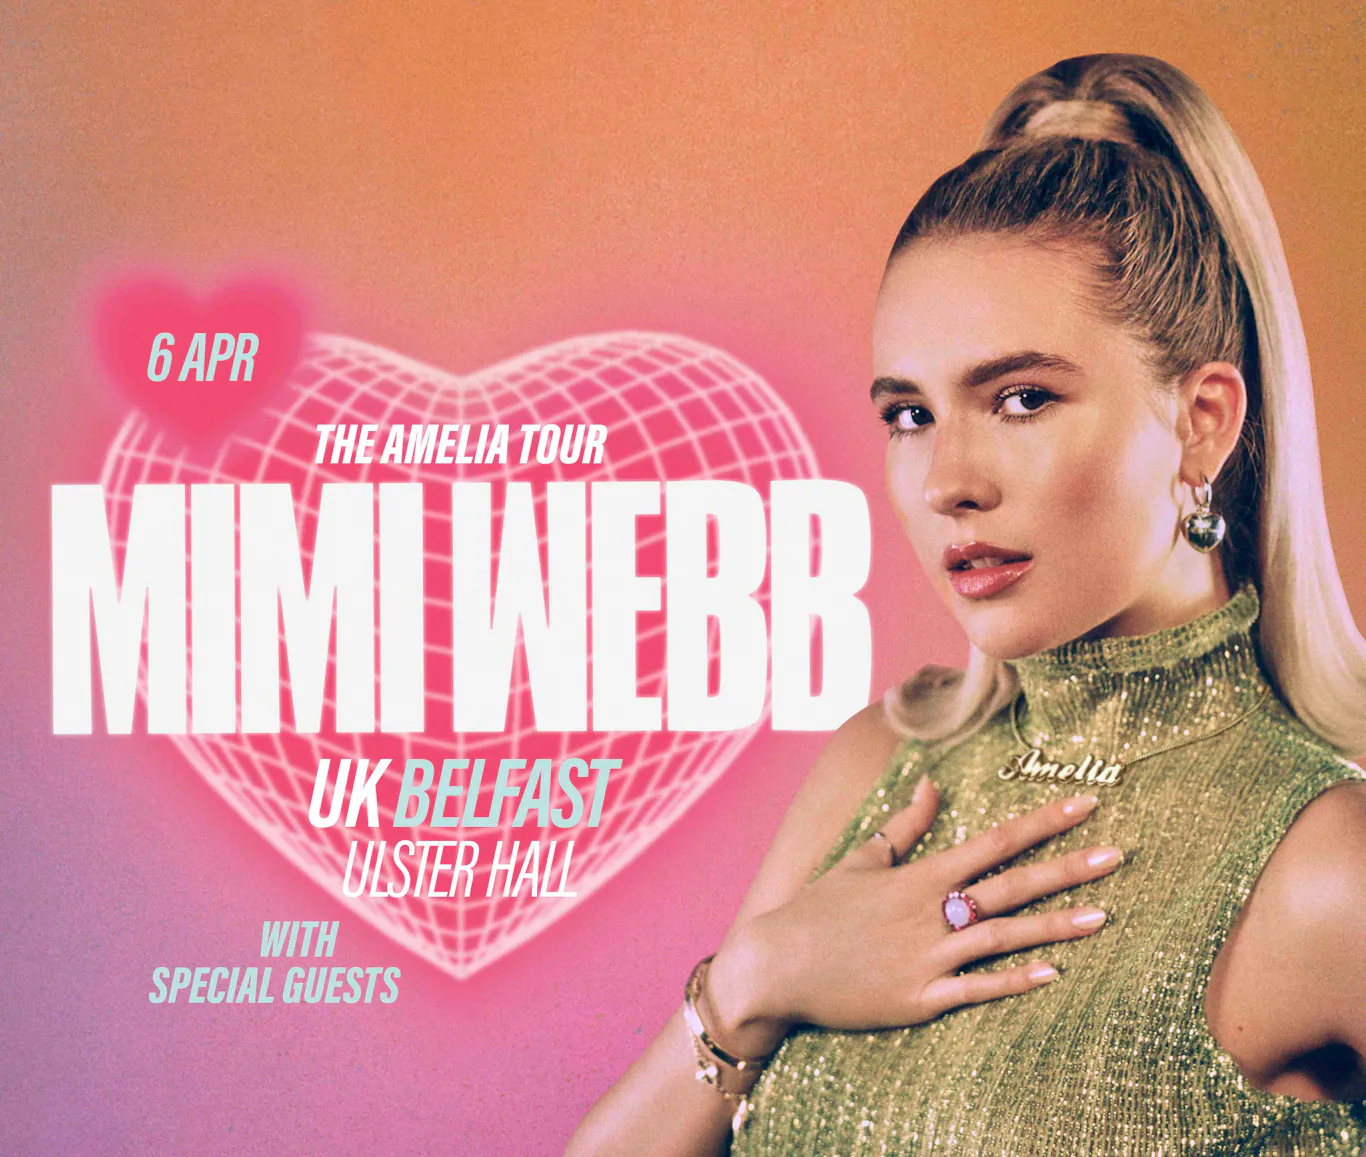 Breakout singer-songwriter MIMI WEBB announces headline show at Ulster Hall, Belfast on April 6th 2023